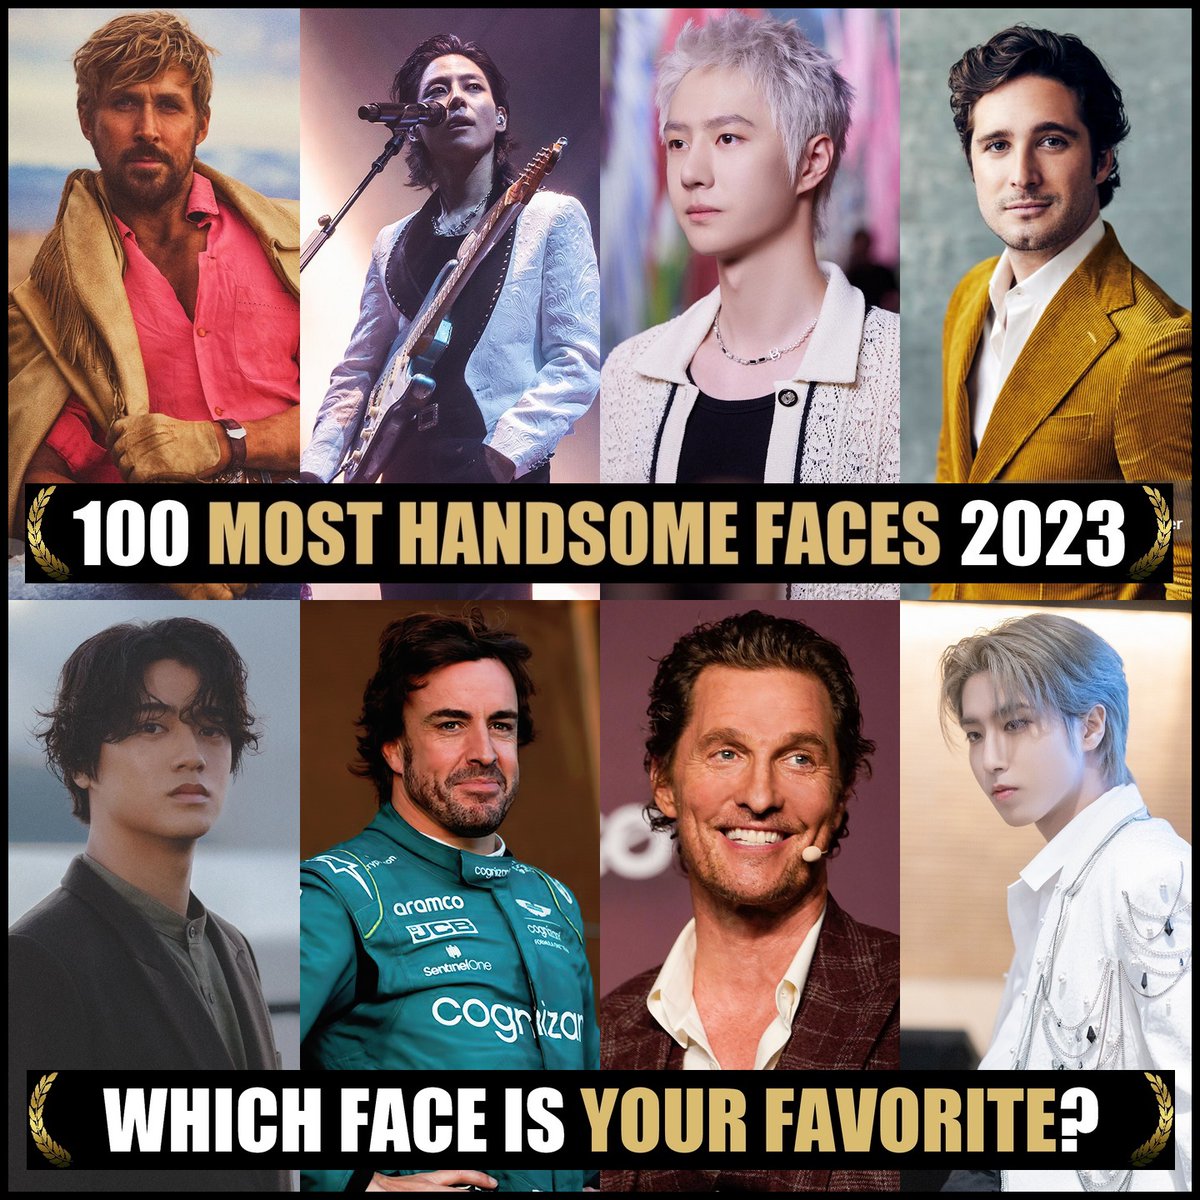 Nominations: 100 Most Handsome Faces 2023. Congrats! Would you like to nominate & vote? Please join our Patreon (Link in Bio) #TCCandler #100faces2023 #RyanGosling #Woosung #therose #WangYibo #diegoboneta #kaitotakahashi #fernandoalonso #MatthewMcConaughey #han #straykids